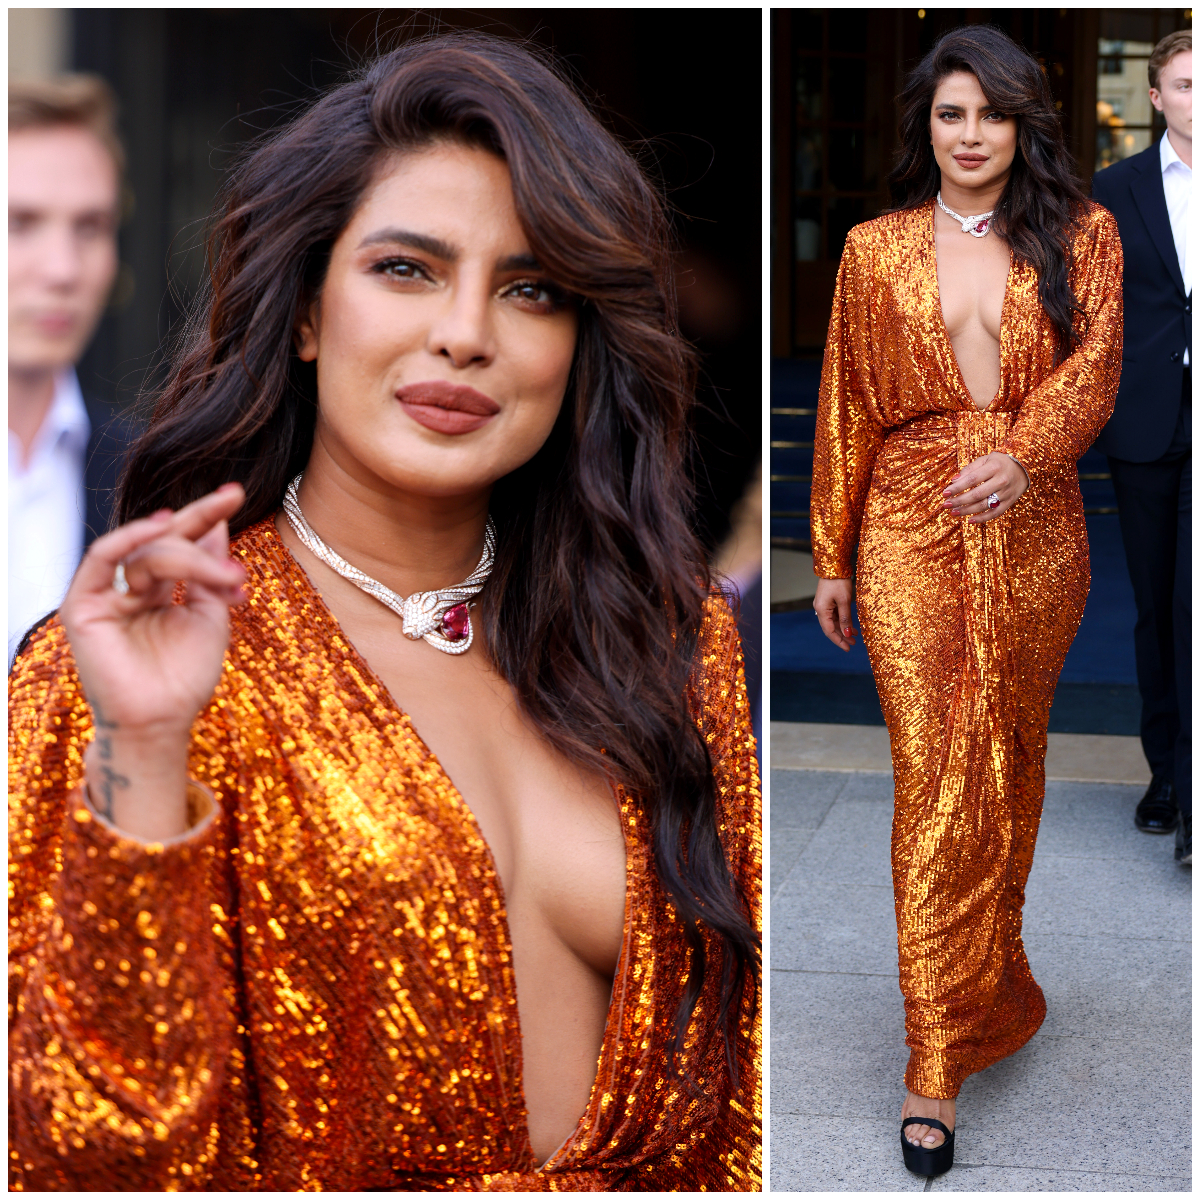 Priyanka looks bold in an orange sequined dress by Rosario